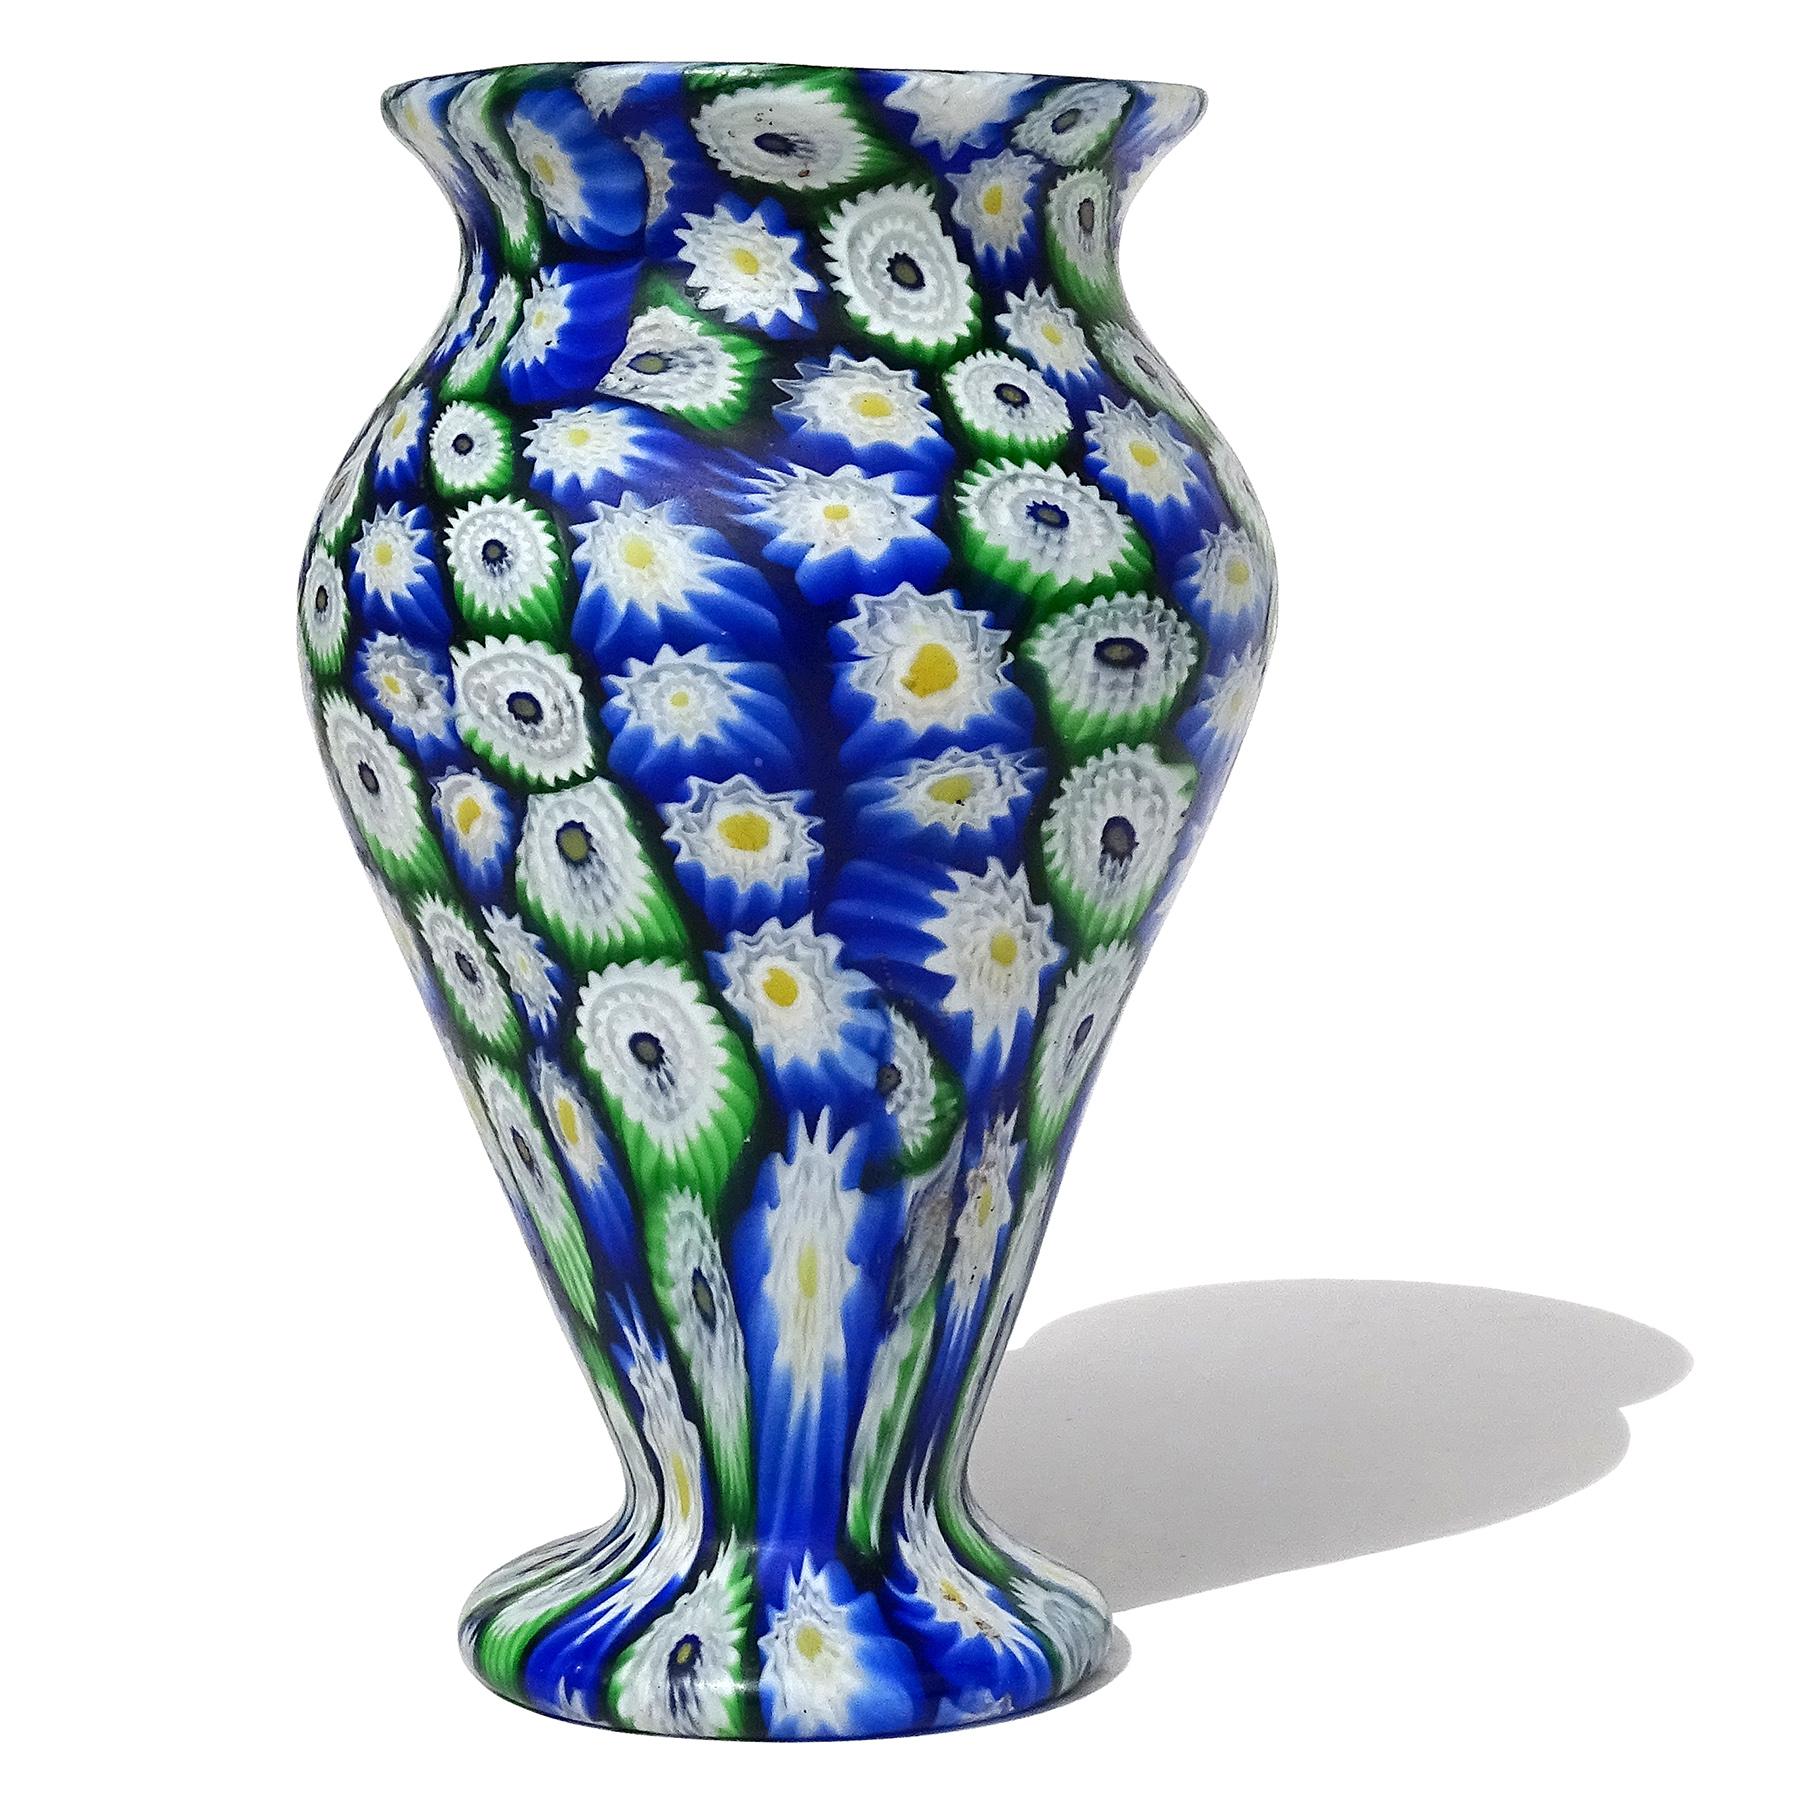 Beautiful antique Murano hand blown Millefiori Murrina flower mosaic Italian art glass decorative flower vase. Documented to the Fratelli Toso company, circa 1910-1930. Created in a classical shape with an alternating pattern of vertical rows in 2